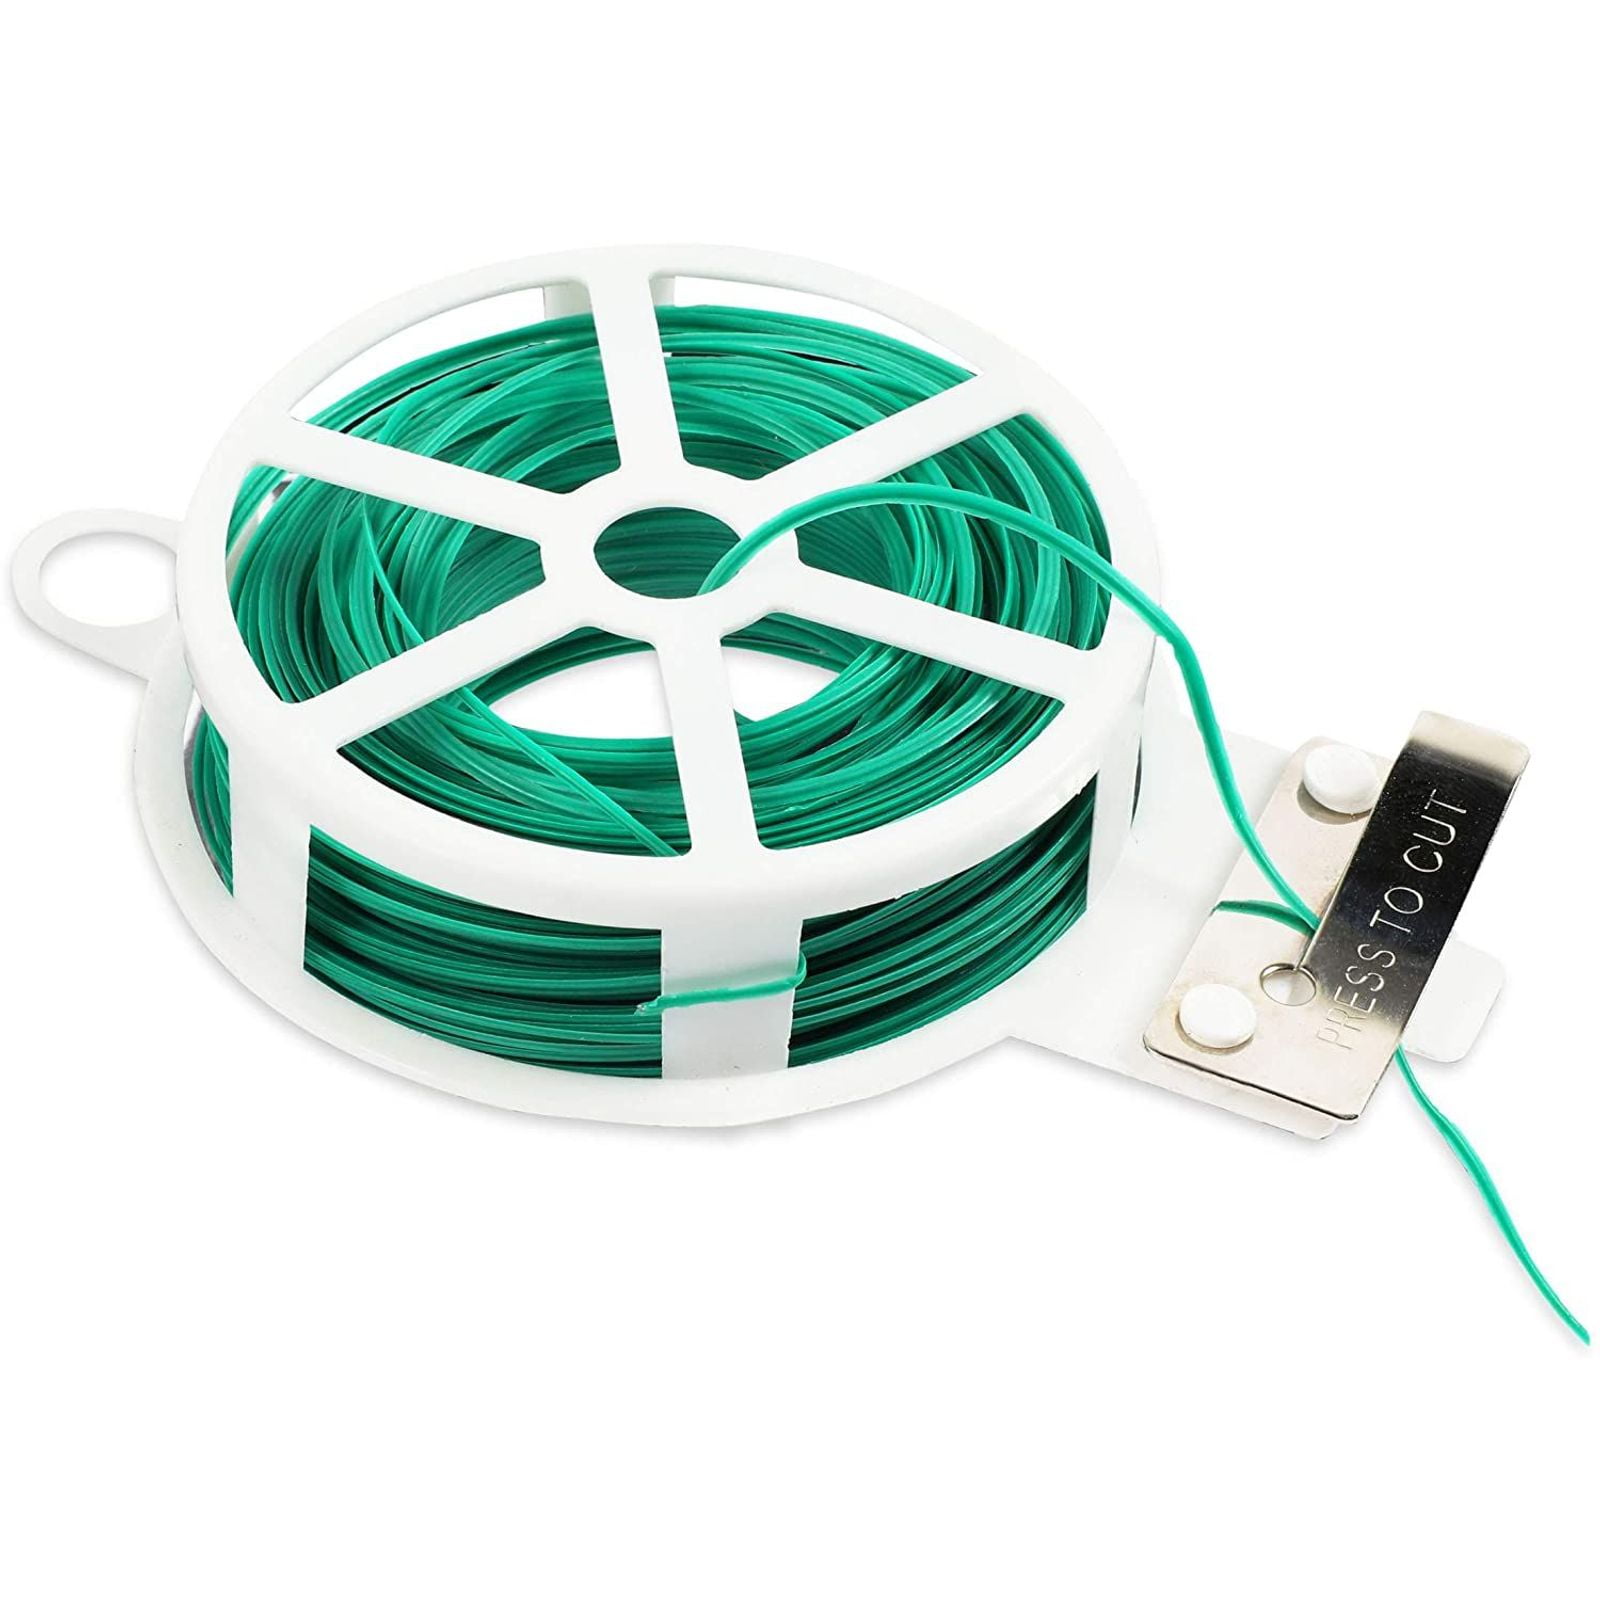 3 Rolls Plant Twist Tie Green Coated Metal Wire With Cutter 246 FT Each for sale online 